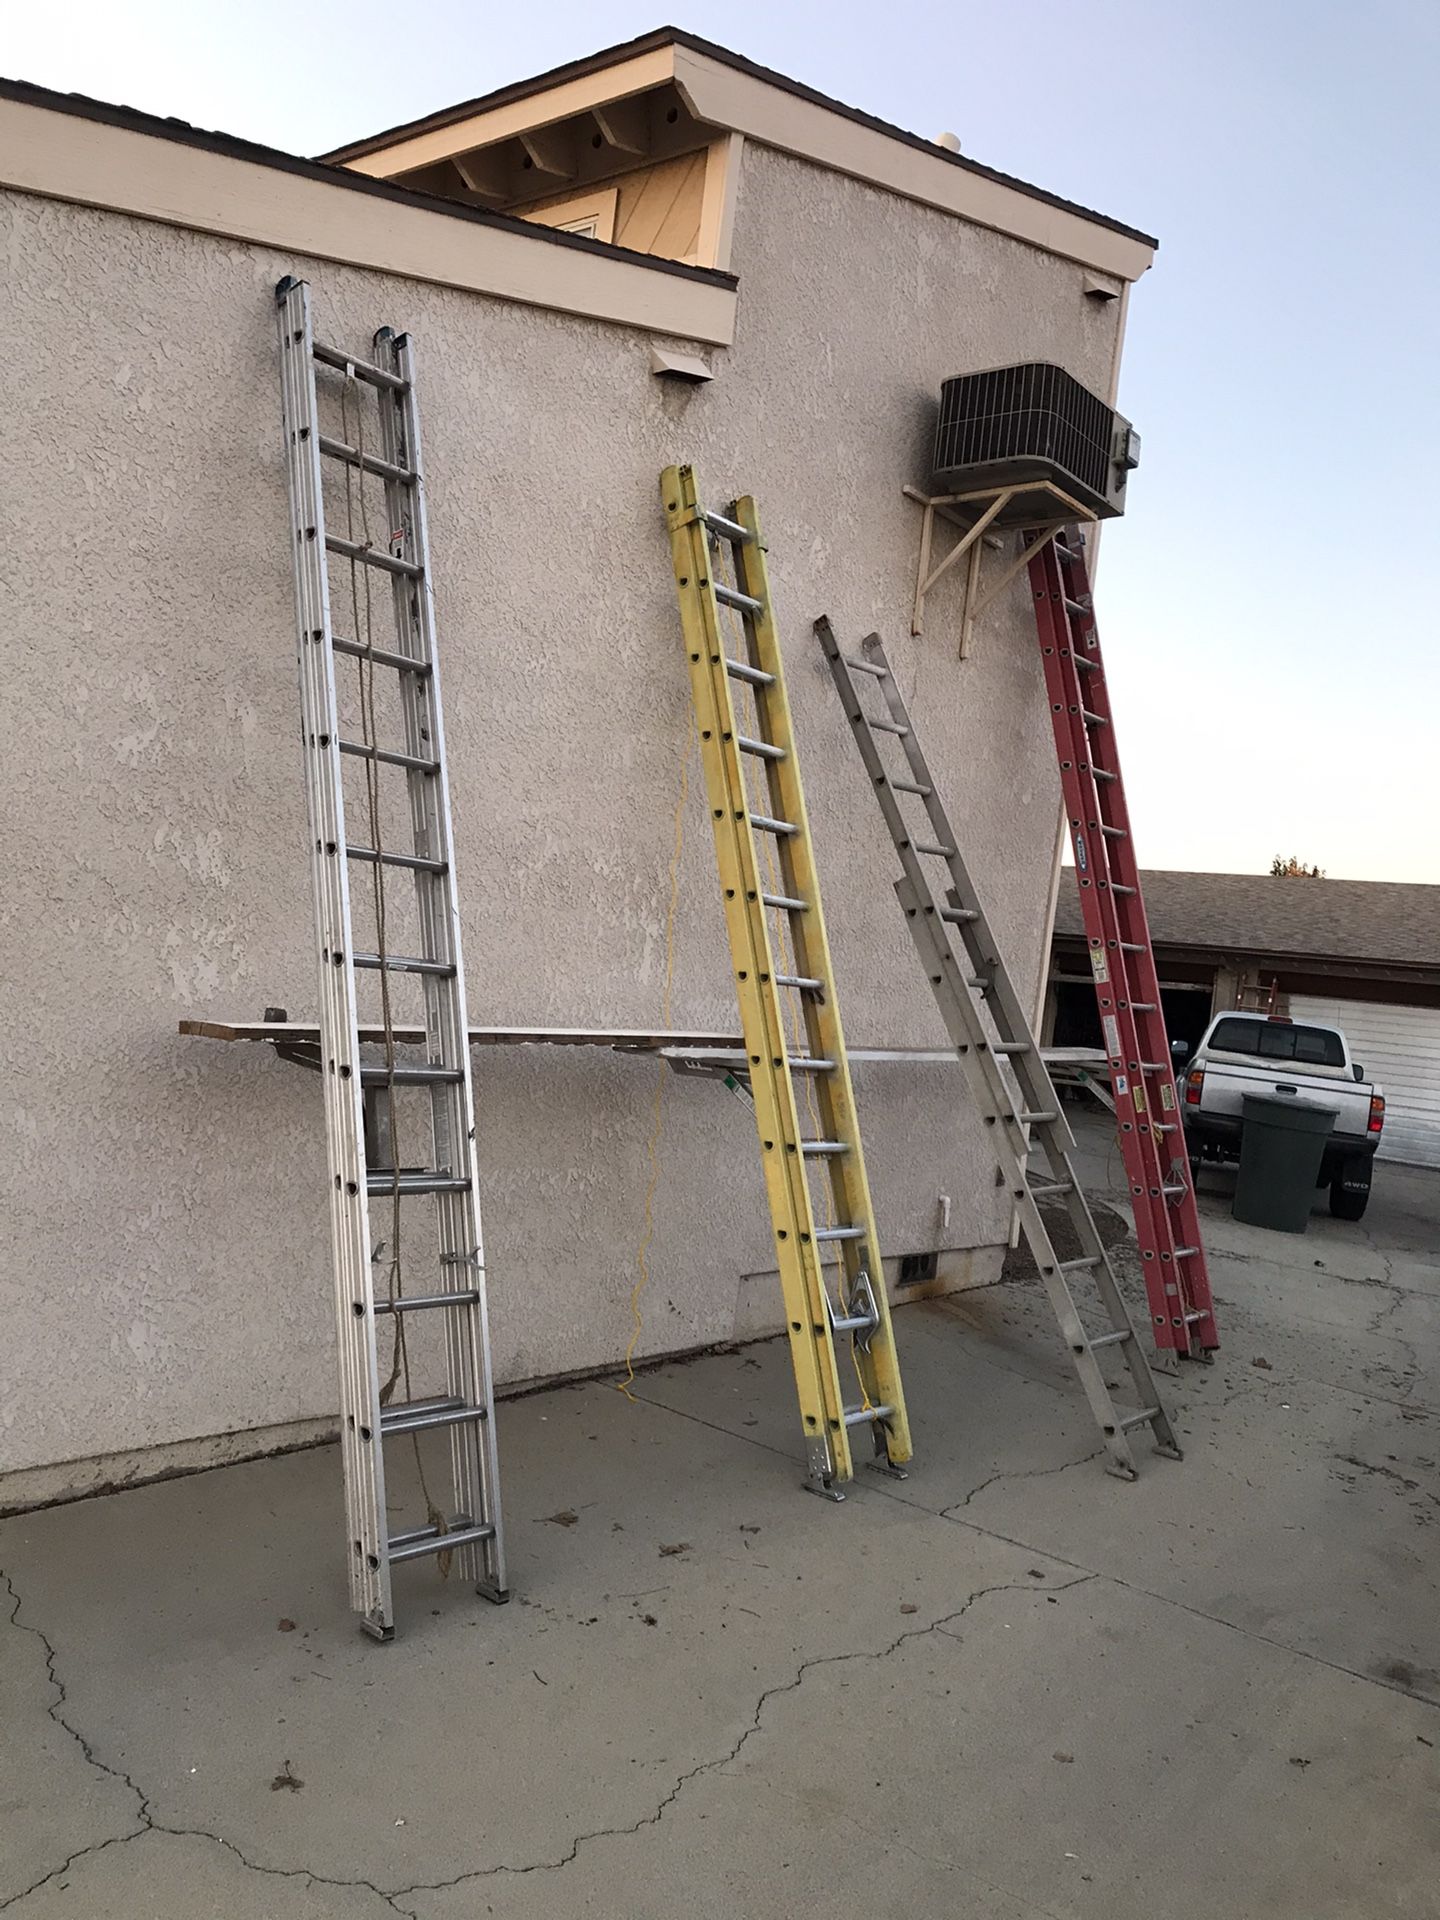 4 extension ladder moveable scaffolding system mix of fiberglass and aluminum Escaleras 16’ 24’ & 28’ 3 Jacks Ontario 91762 $435